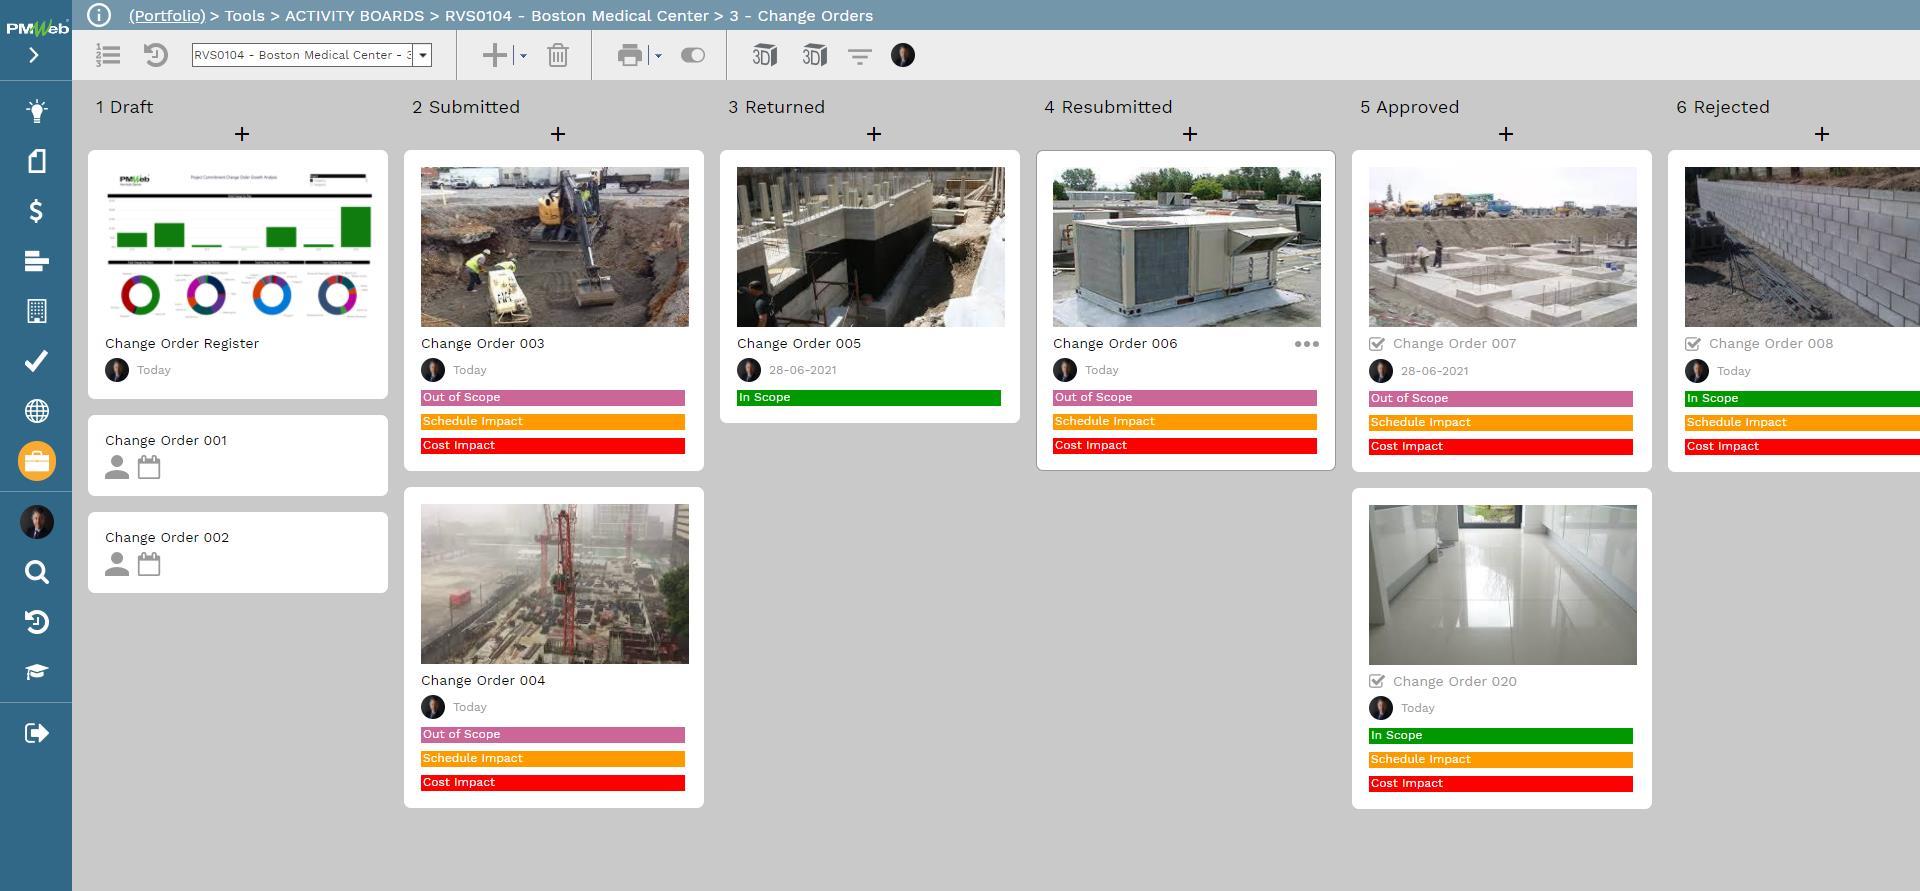 Using Kanban Activity Boards to Enable Visual Monitoring, Evaluation and Reporting of Key Business Processes on Capital Construction Projects